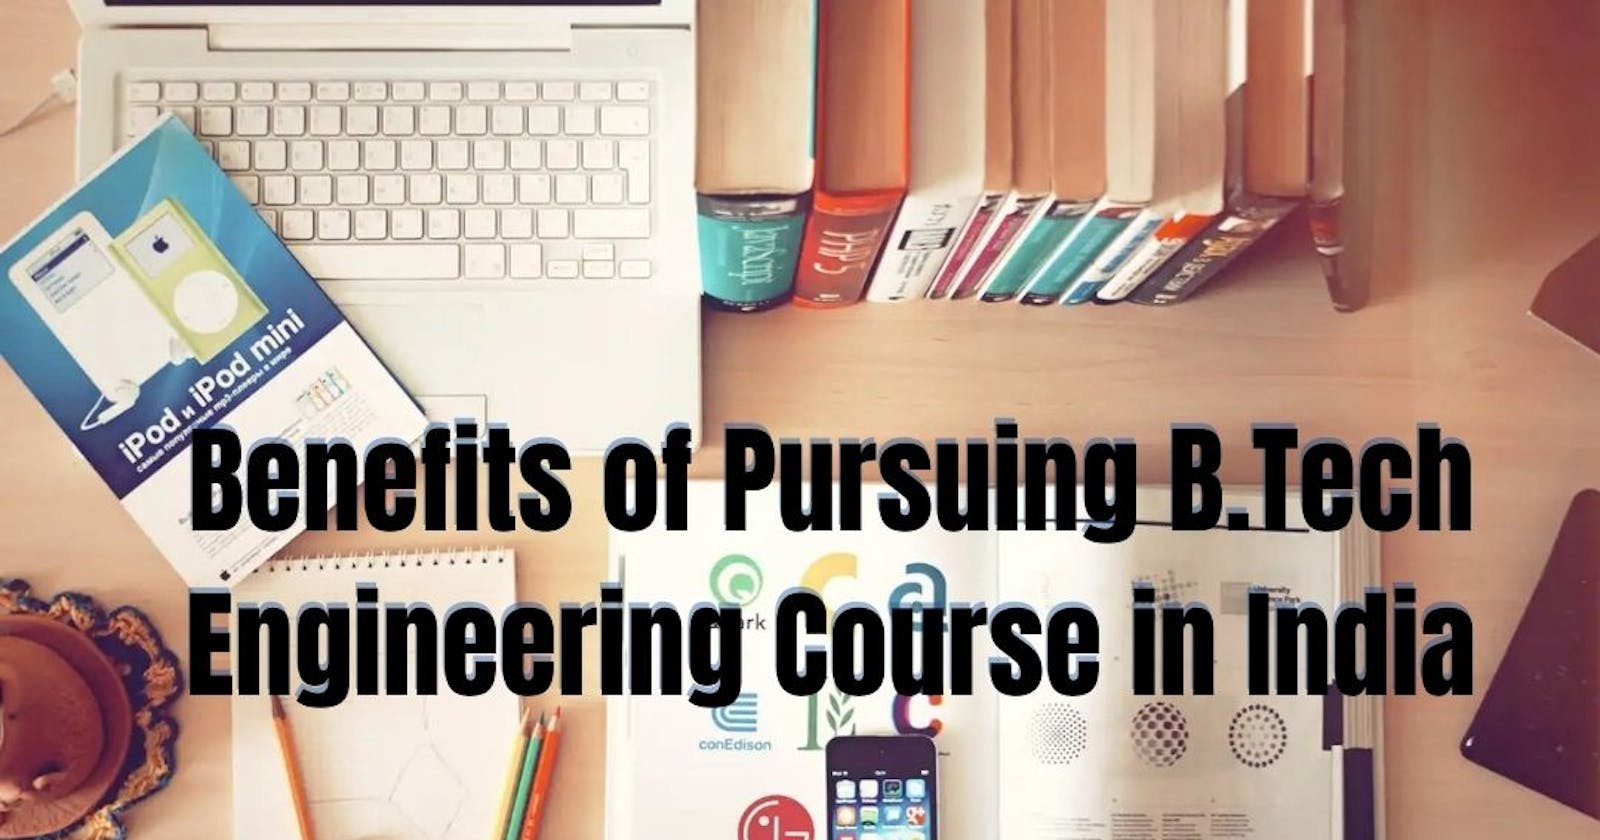 Benefits of Pursuing a B.Tech Engineering Course in India